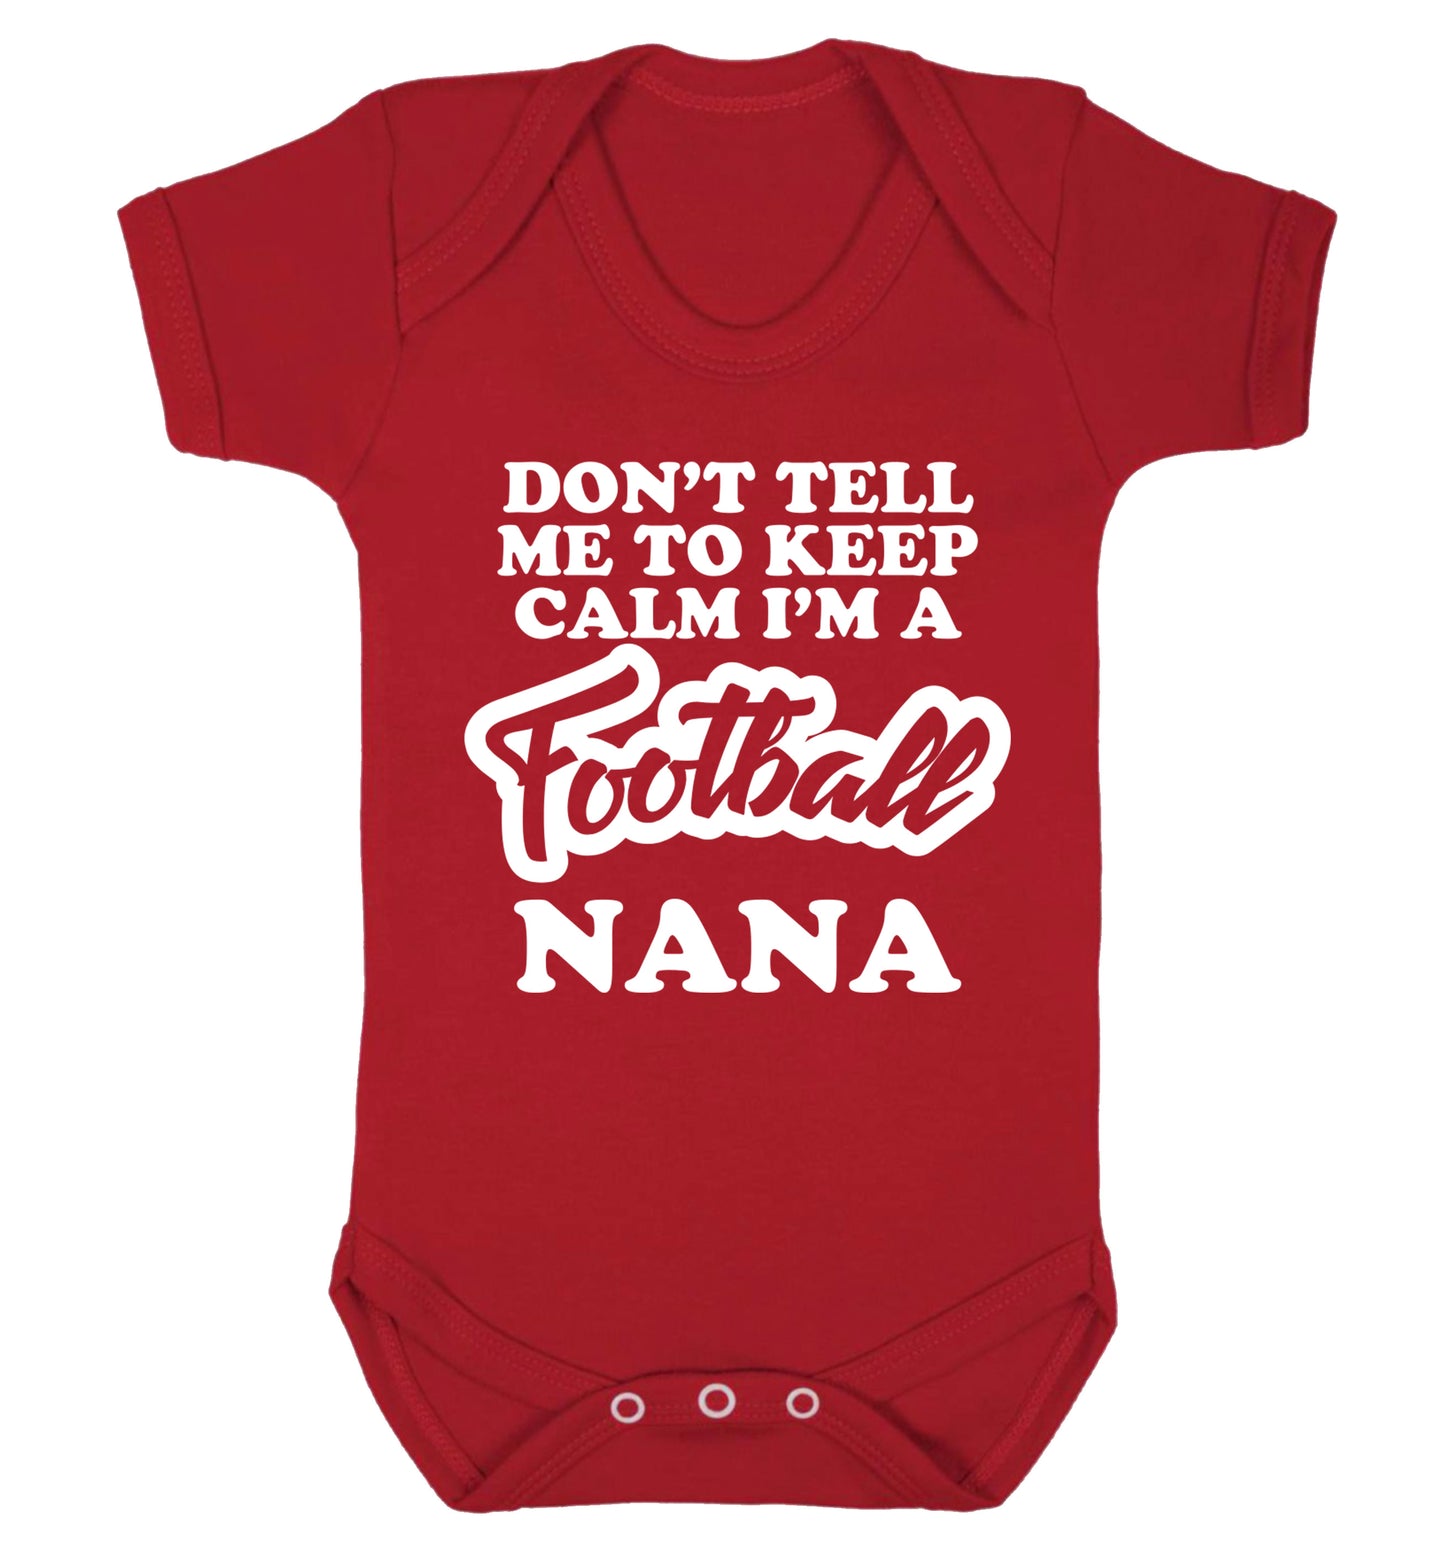 Don't tell me to keep calm I'm a football nana Baby Vest red 18-24 months